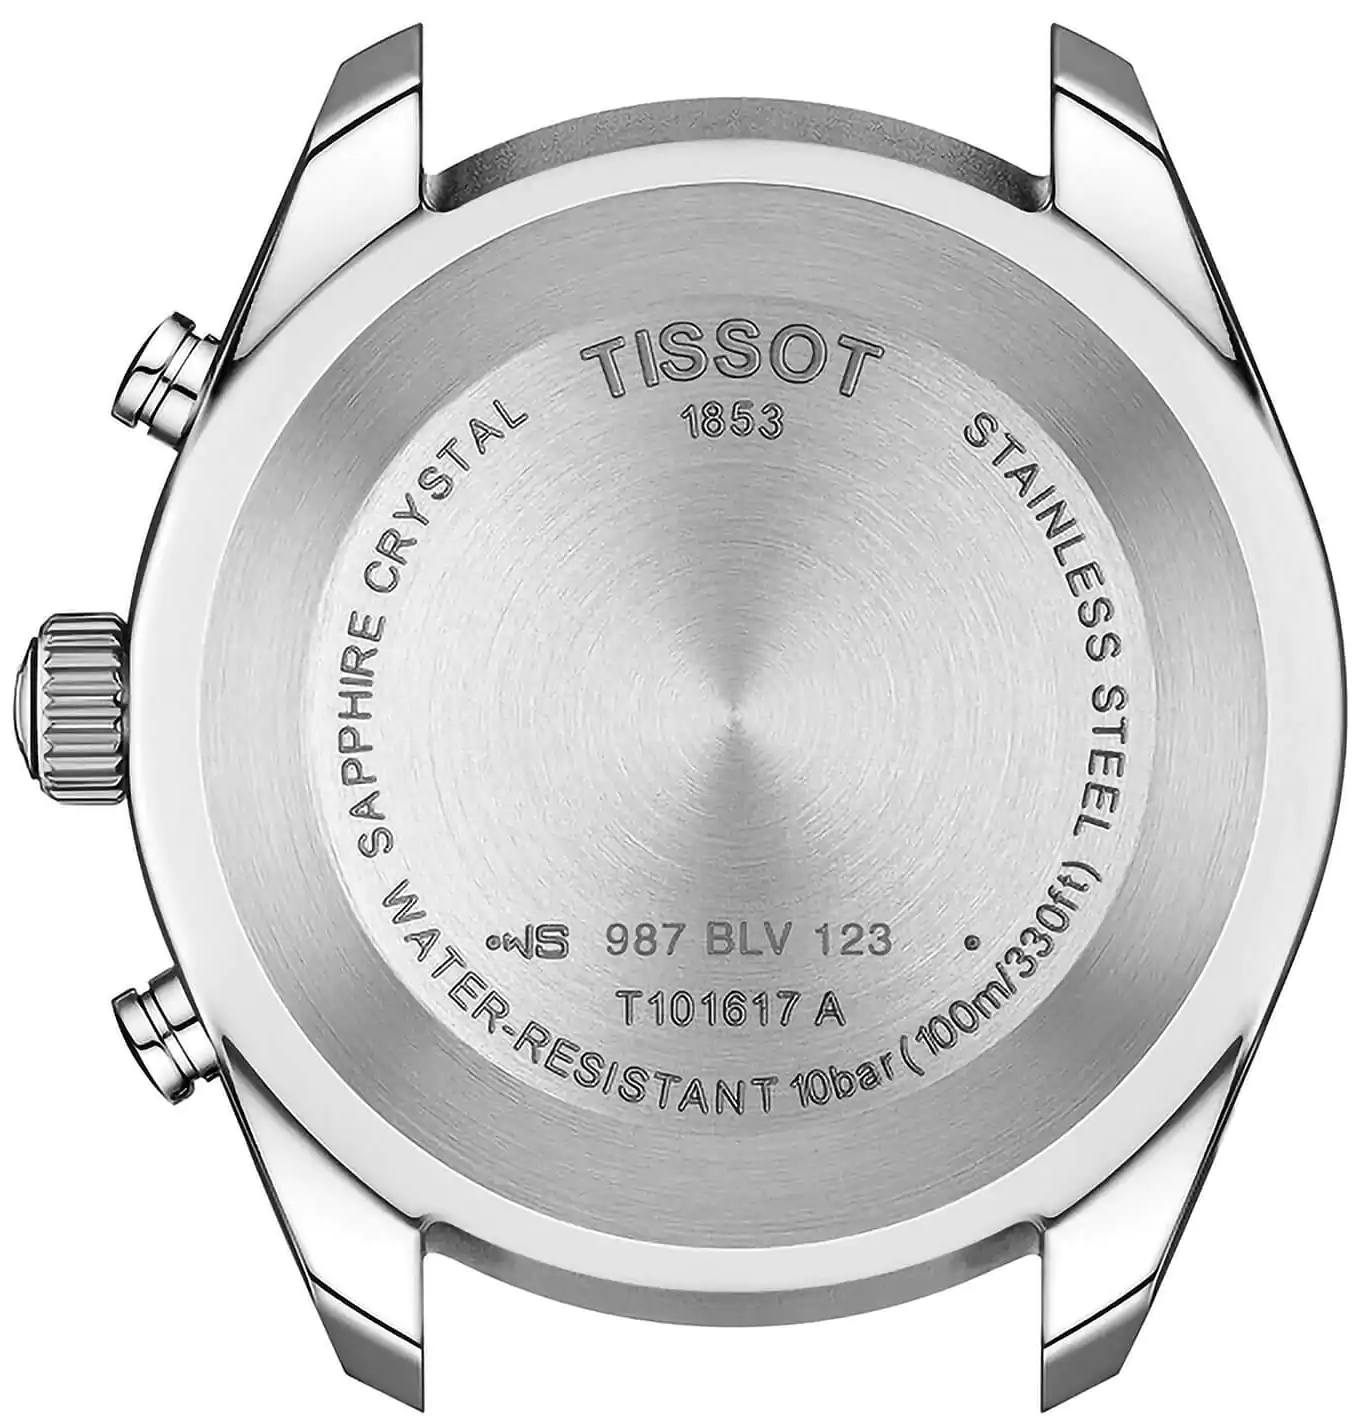 Tissot 1853 Watch for Men, Analog, Leather Strap, Brown, T101.617.16.031